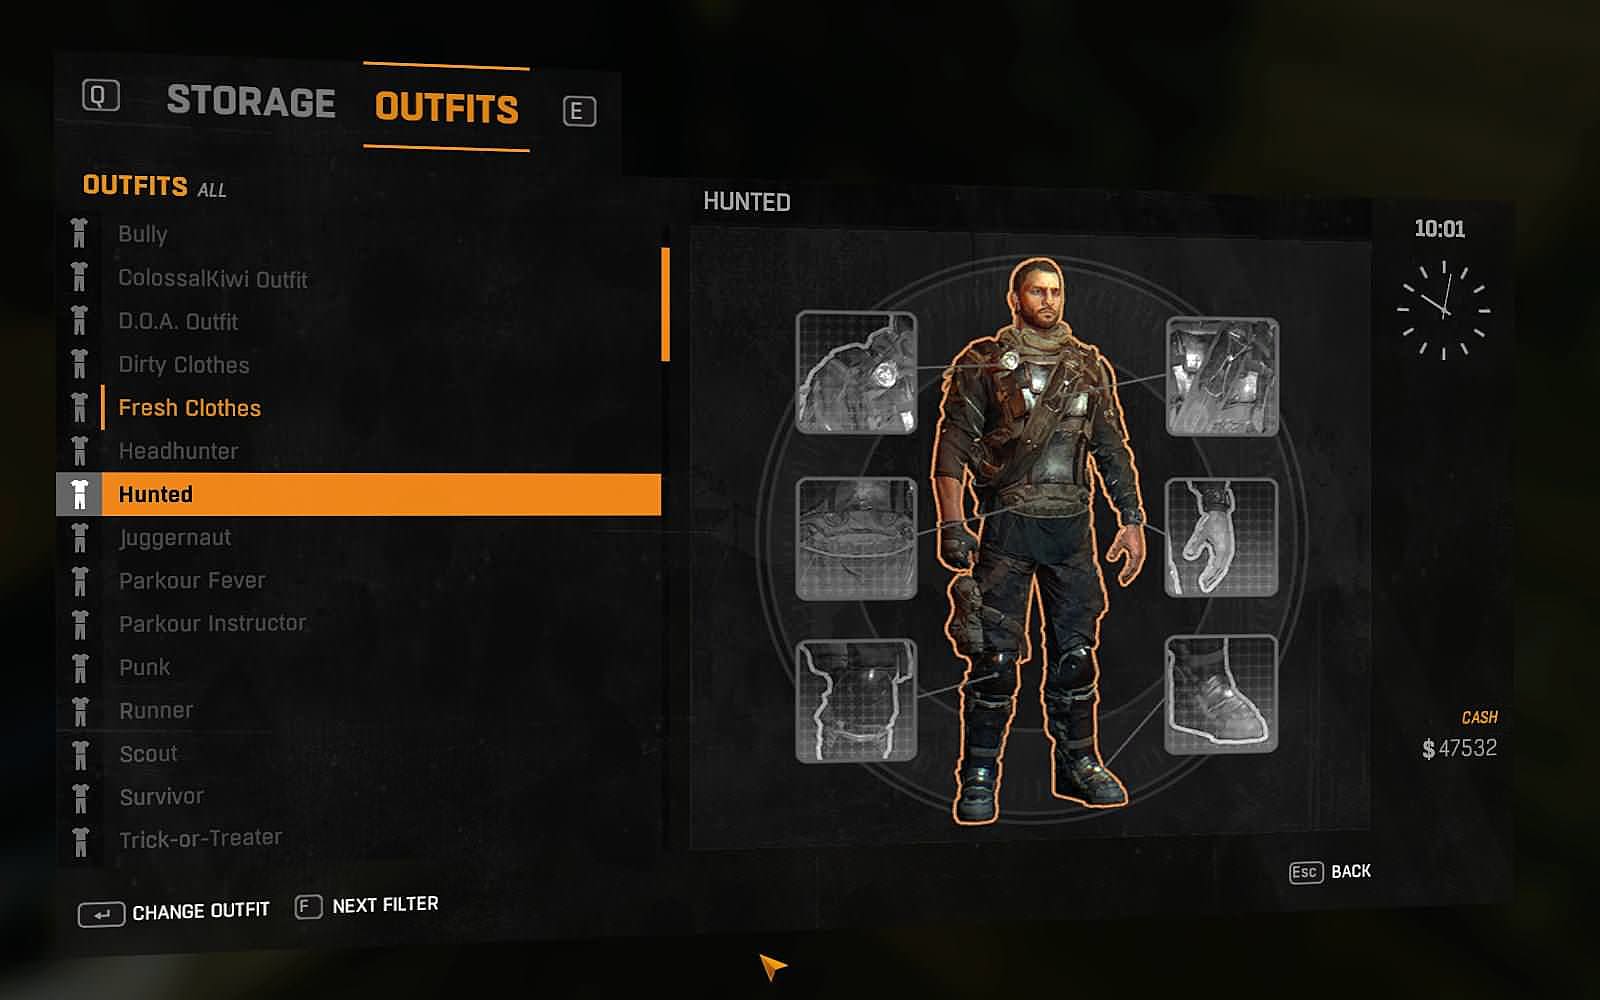 How to Unlock Hunted Outfit in Light | Light